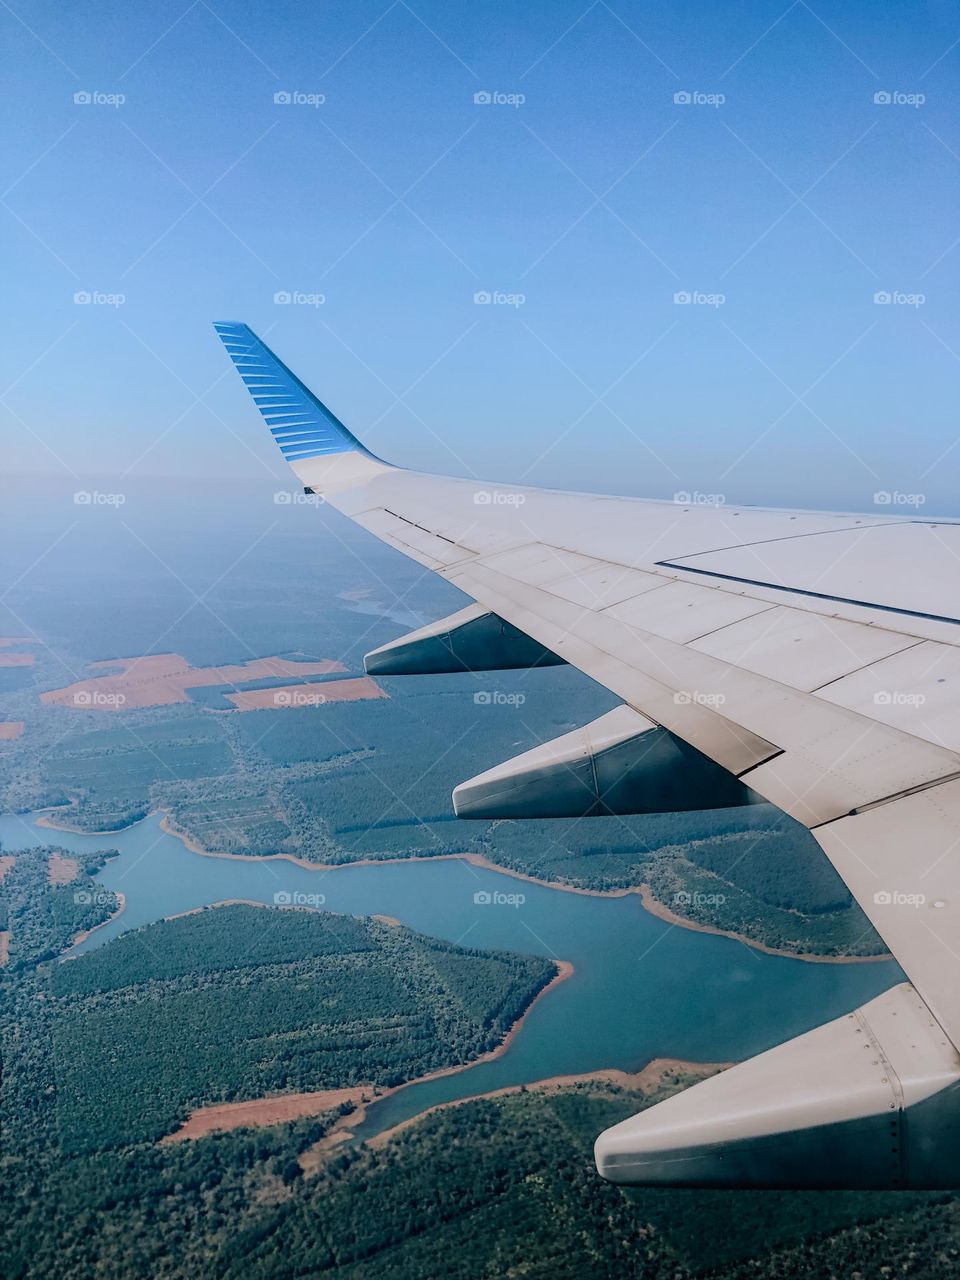 Flying over Misiones, Argentina